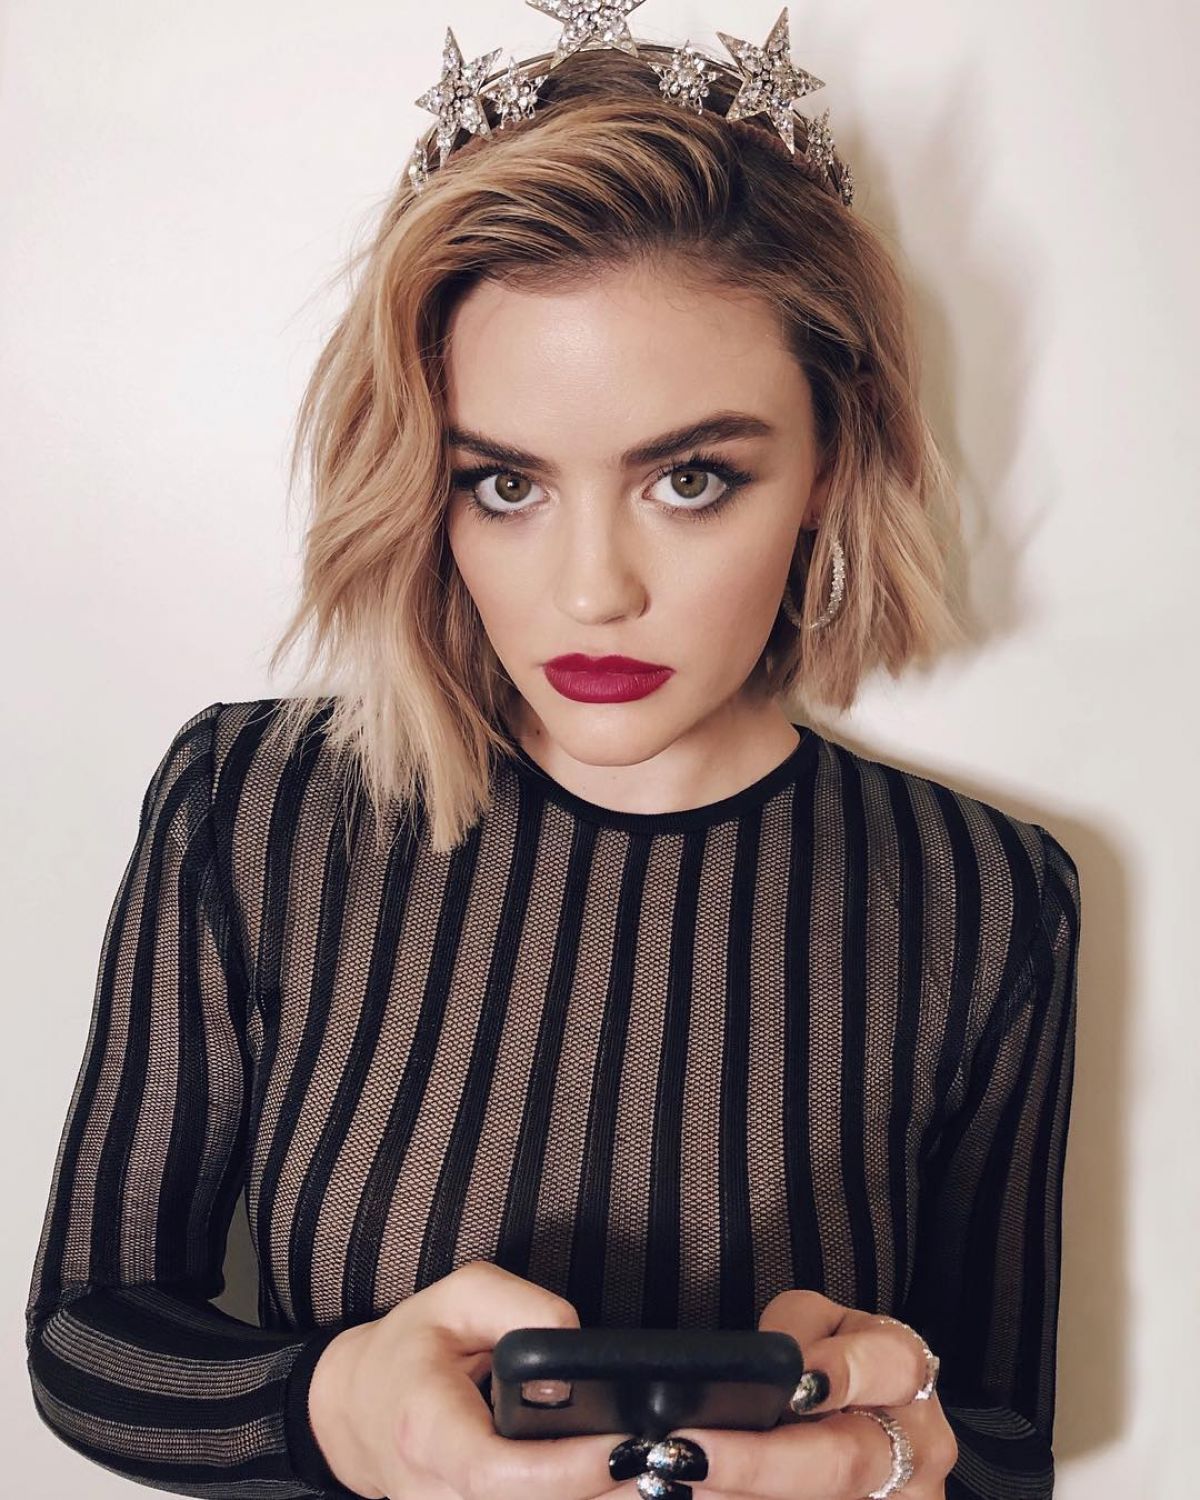 LUCY HALE at Rockin’ Eve 19 – Instagram Pictures – HawtCelebs